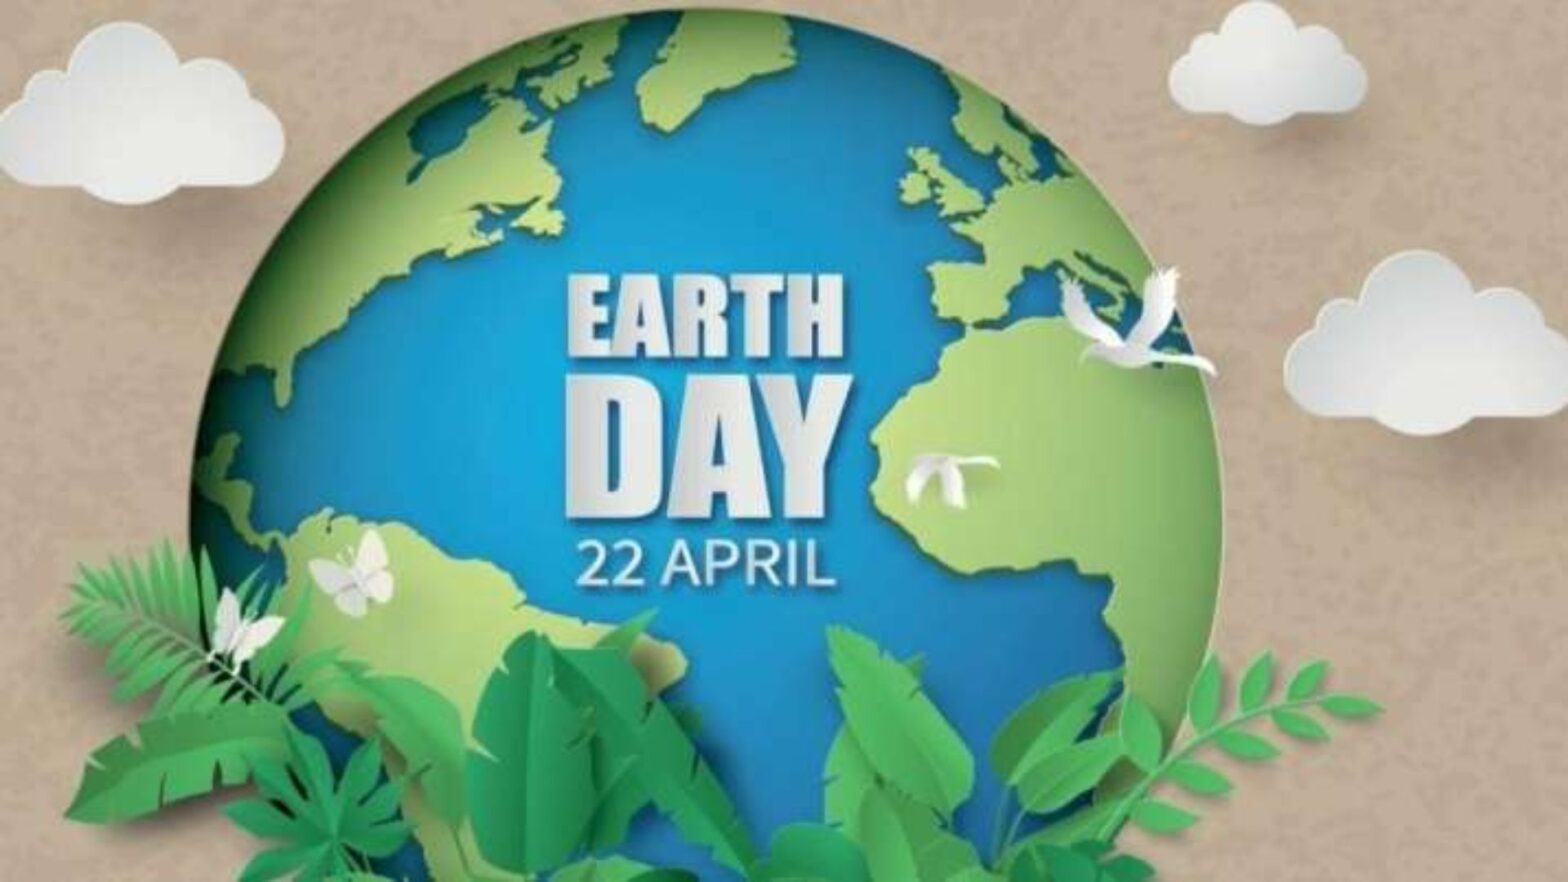 Earth Day: Use of plastic causing spread of fatal diseases: Commissioner Multan